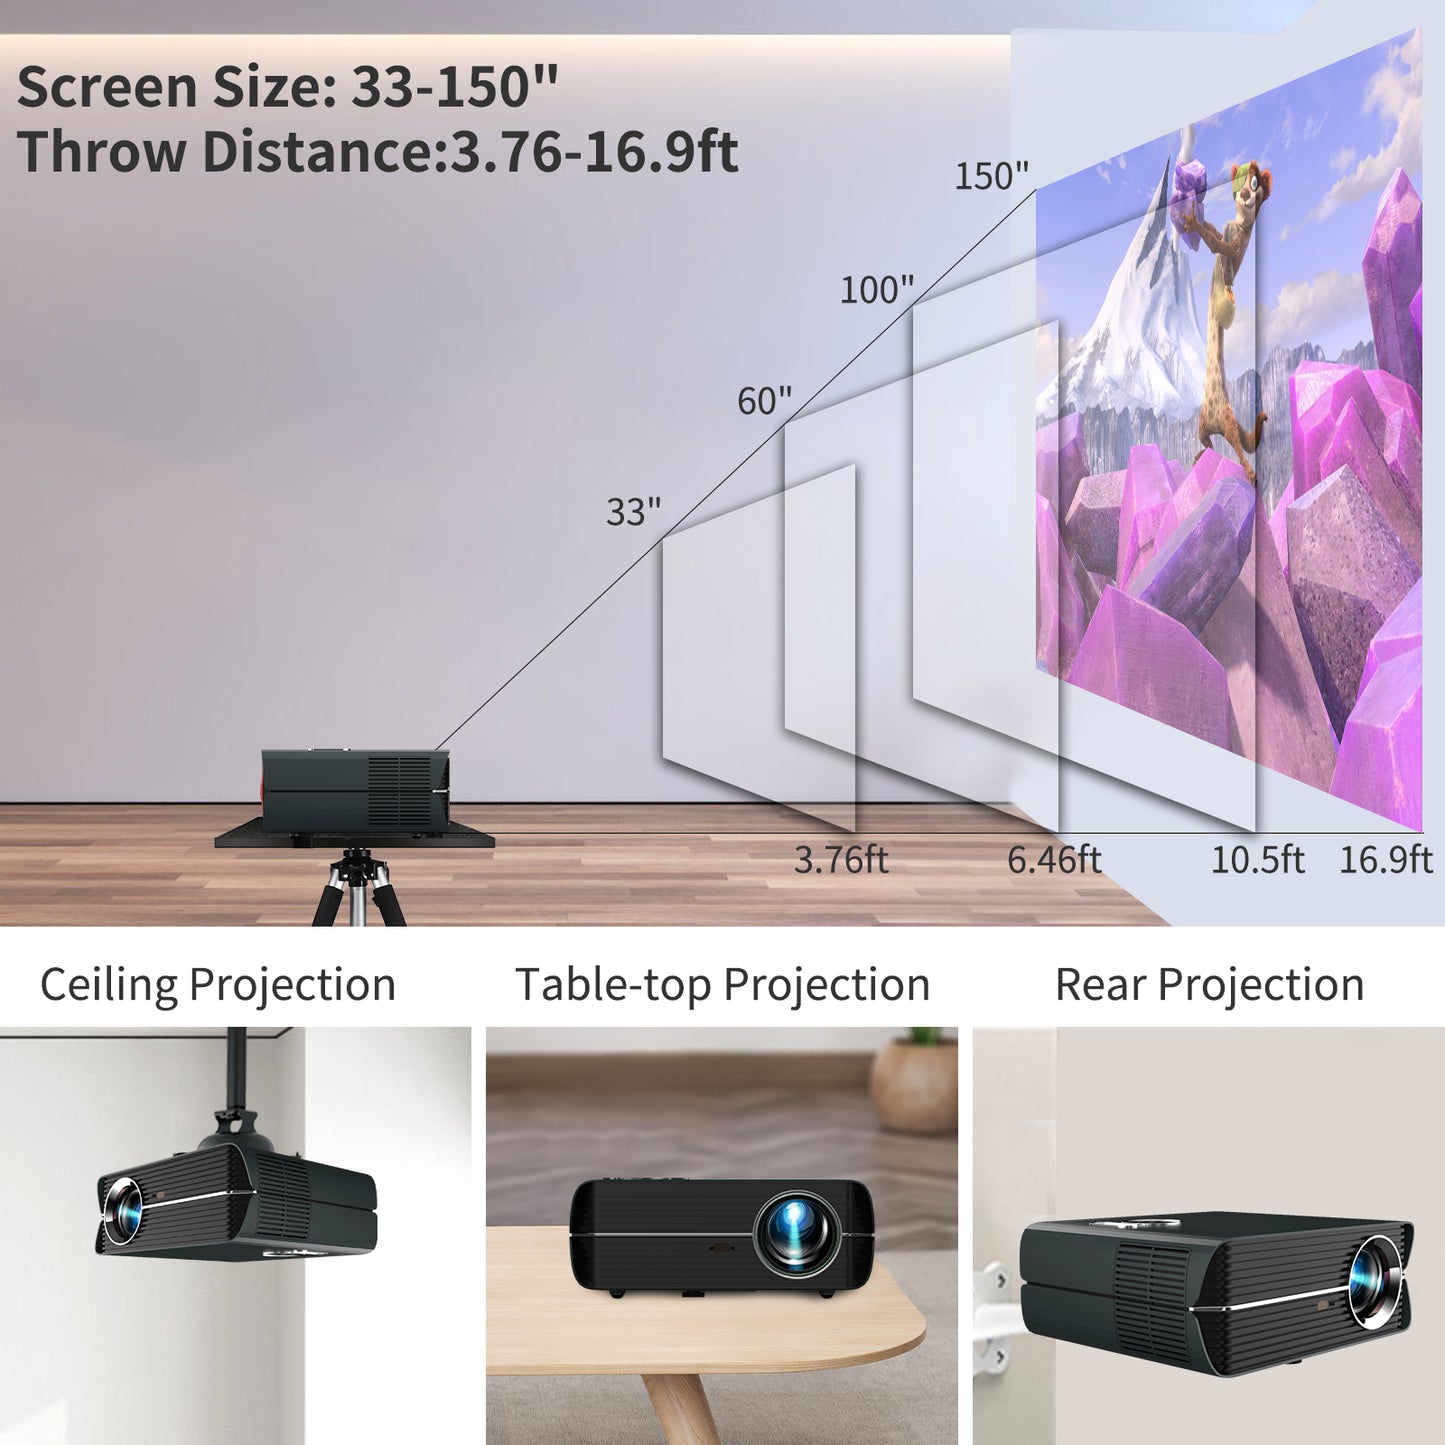 CAIWEI Android 9.0 WIFI Projector 1080P Full HD Bluetooth Wireless Smart for Netflix Youtube Sportify Apps